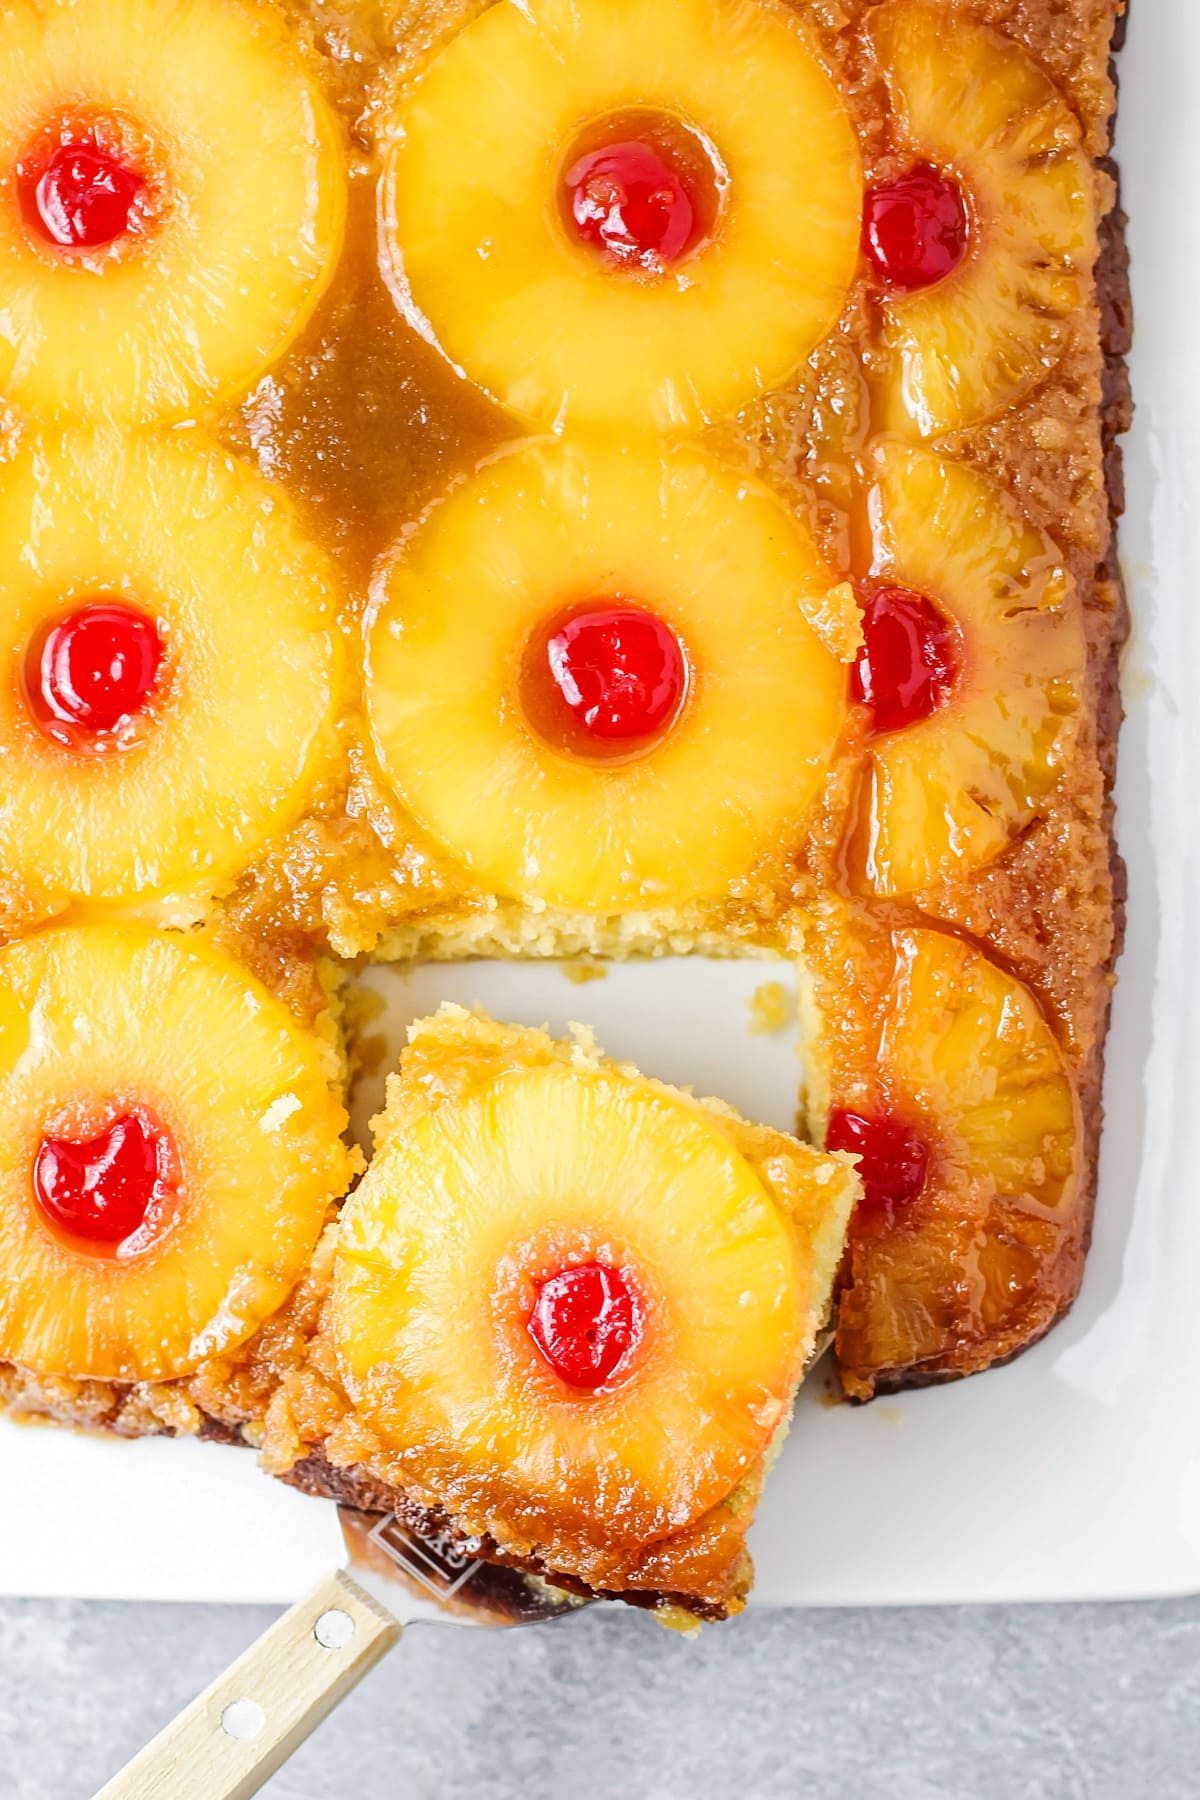 Caramelized pineapple upside down cake served in a baking dish.